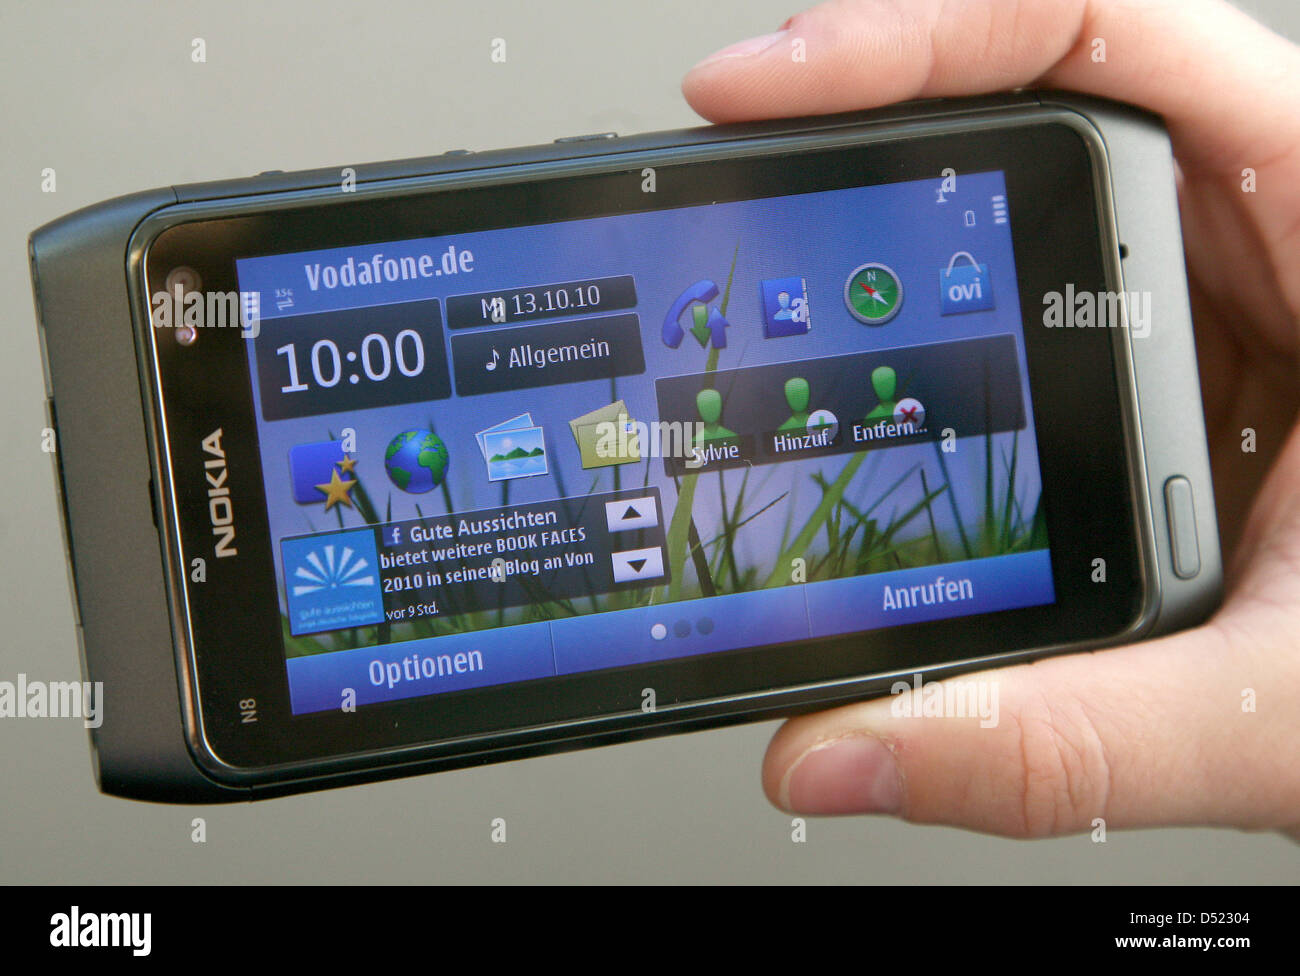 The new multimedia smartphone N8 of the company Nokia is presented in Berlin, Germany, 13 October 2010. With the new series of the model 'N', the market leader for mobile phones wishes to compete with Apple and Google. In competition with the iphone and Android, the last Nokia system Symbian seemed quite outmoded. Now, the N8 is the first smartphone with a new version of the mobile Stock Photo